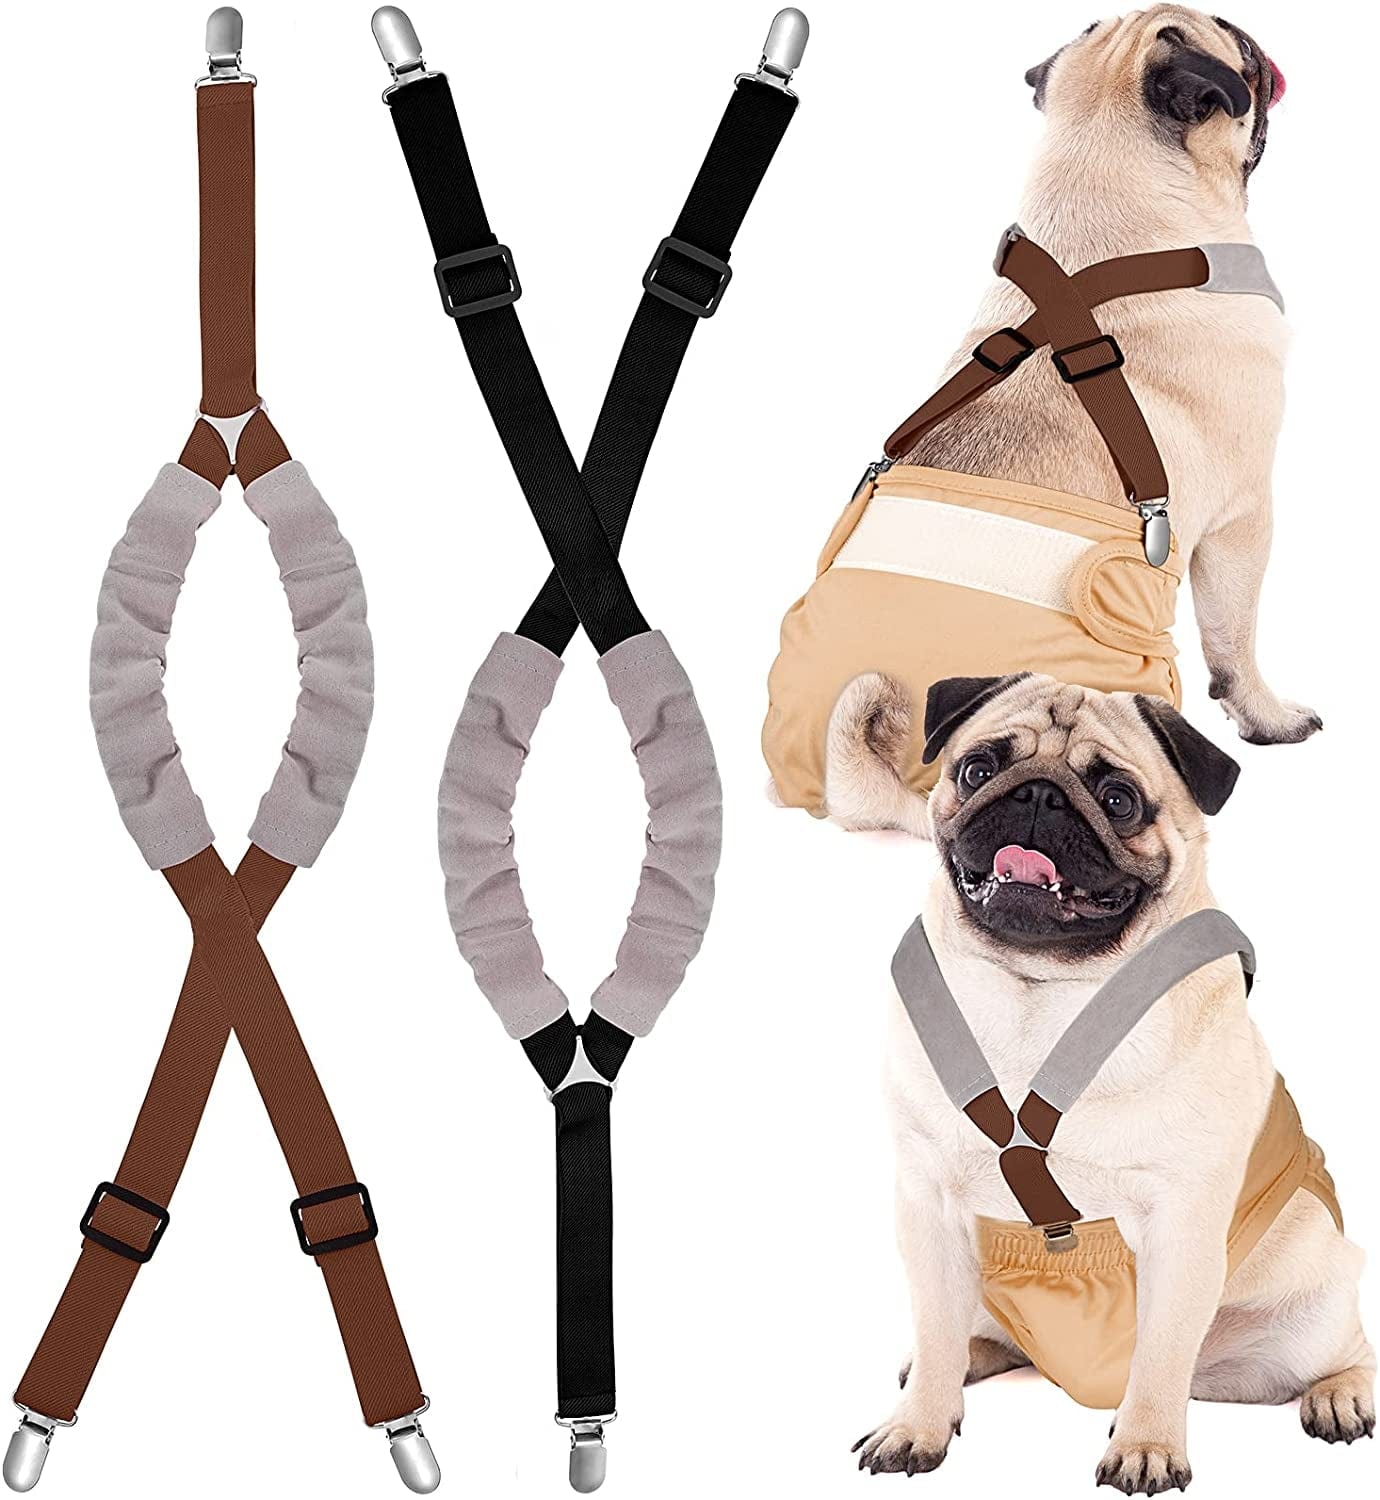 Saintrygo 2 Pieces Dog Diaper Suspenders Belly Bands Canine Harness Keep Diaper on Your Dog for Small Medium and Large Dogs (Black, Pink, Medium) Animals & Pet Supplies > Pet Supplies > Dog Supplies > Dog Apparel Saintrygo Black, Brown Medium 